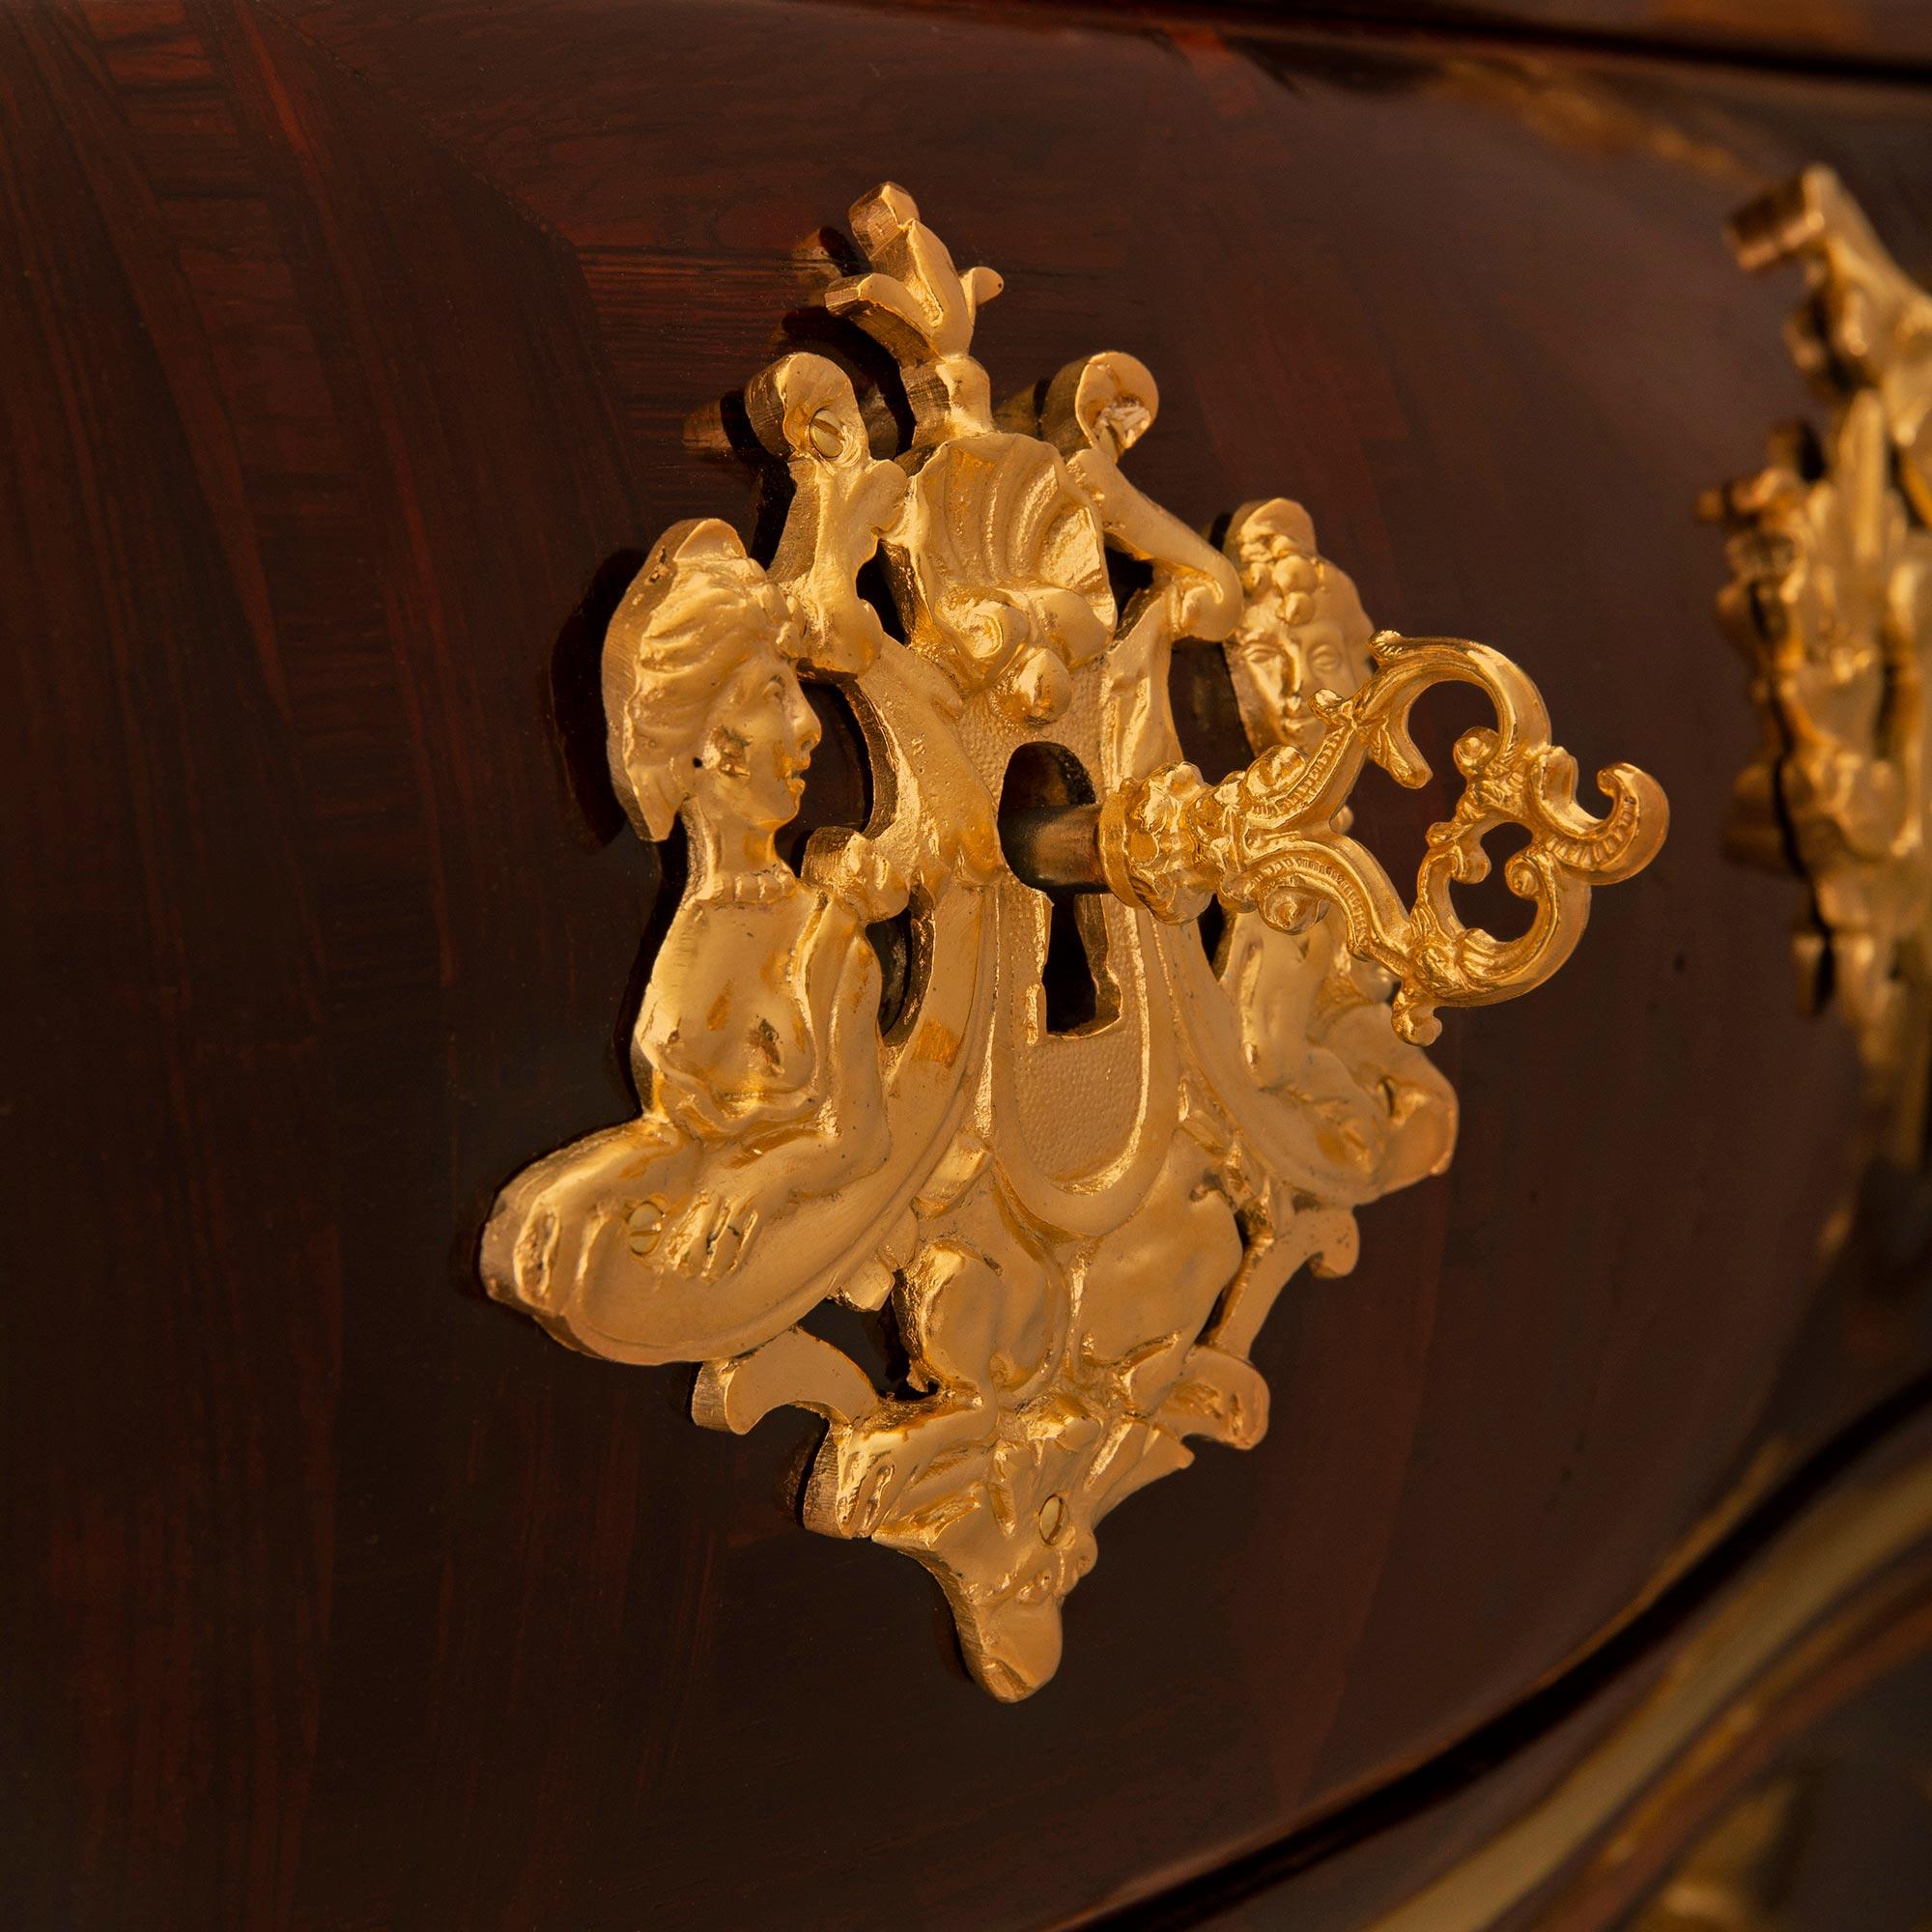 French Mid-18th Century Régence Period Rosewood, Ormolu and Marble Commode For Sale 4